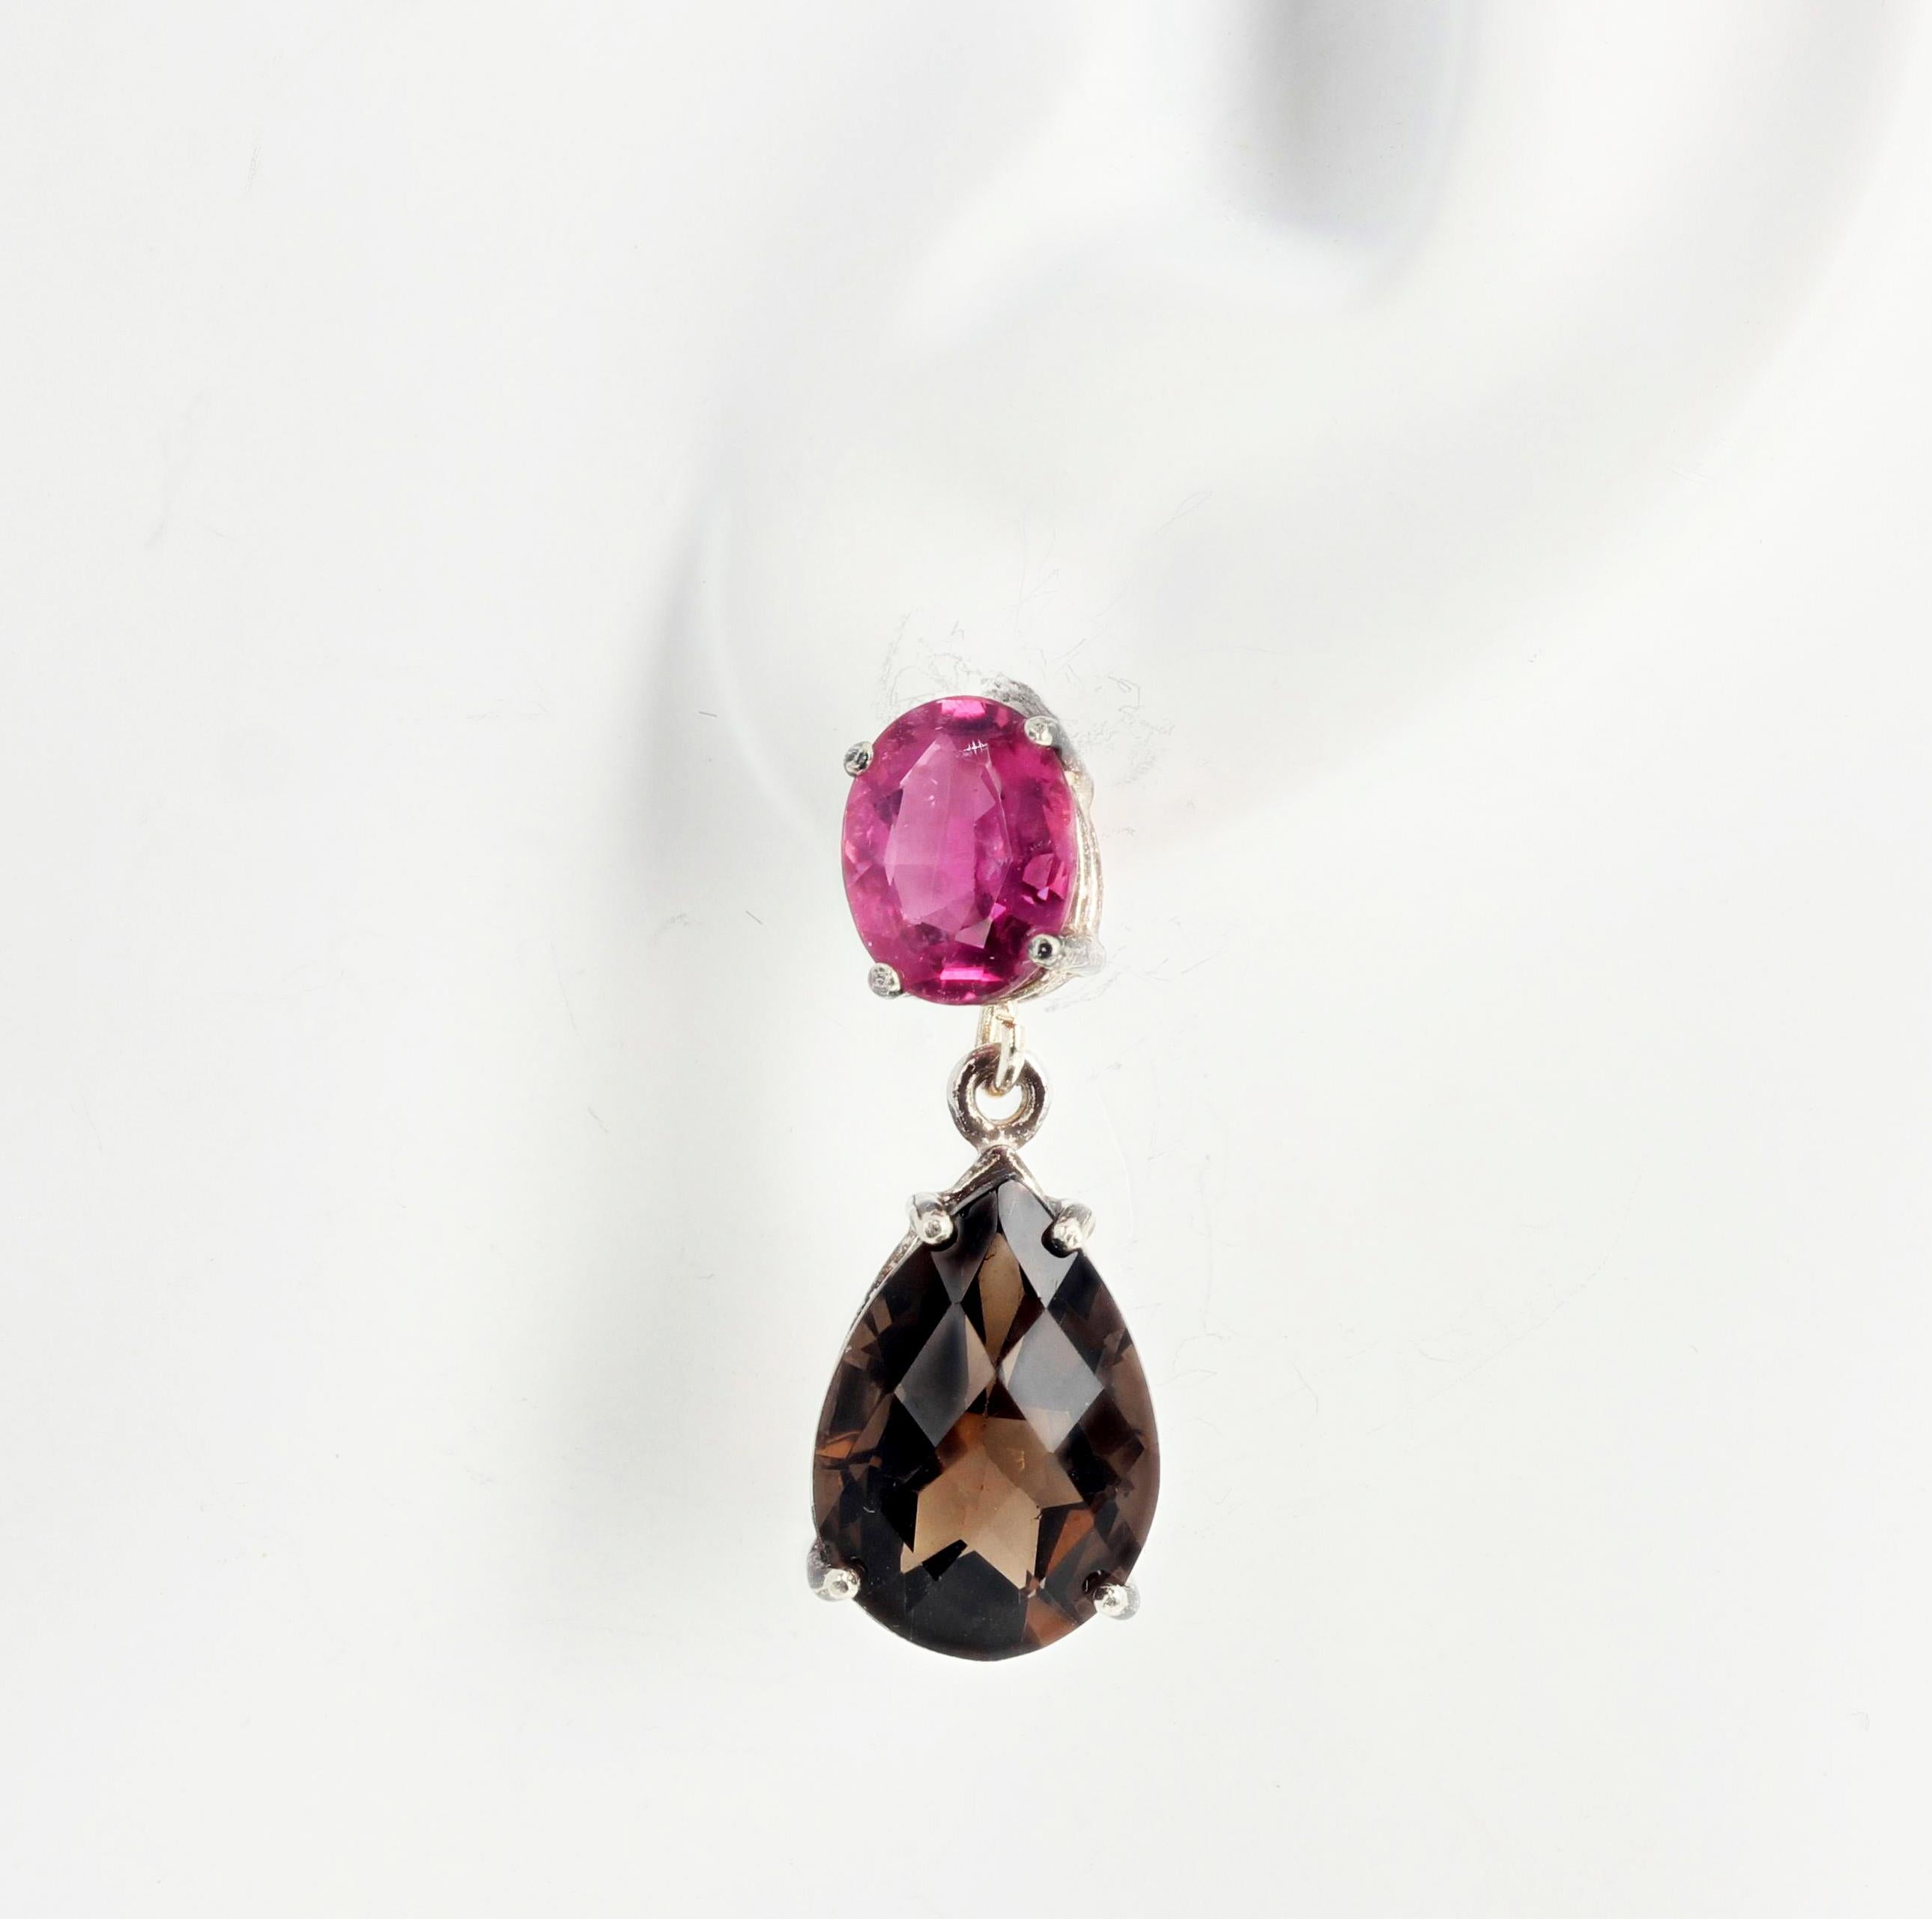 Women's Pink Tourmaline and Smoky Quartz Sterling Silver Earrings